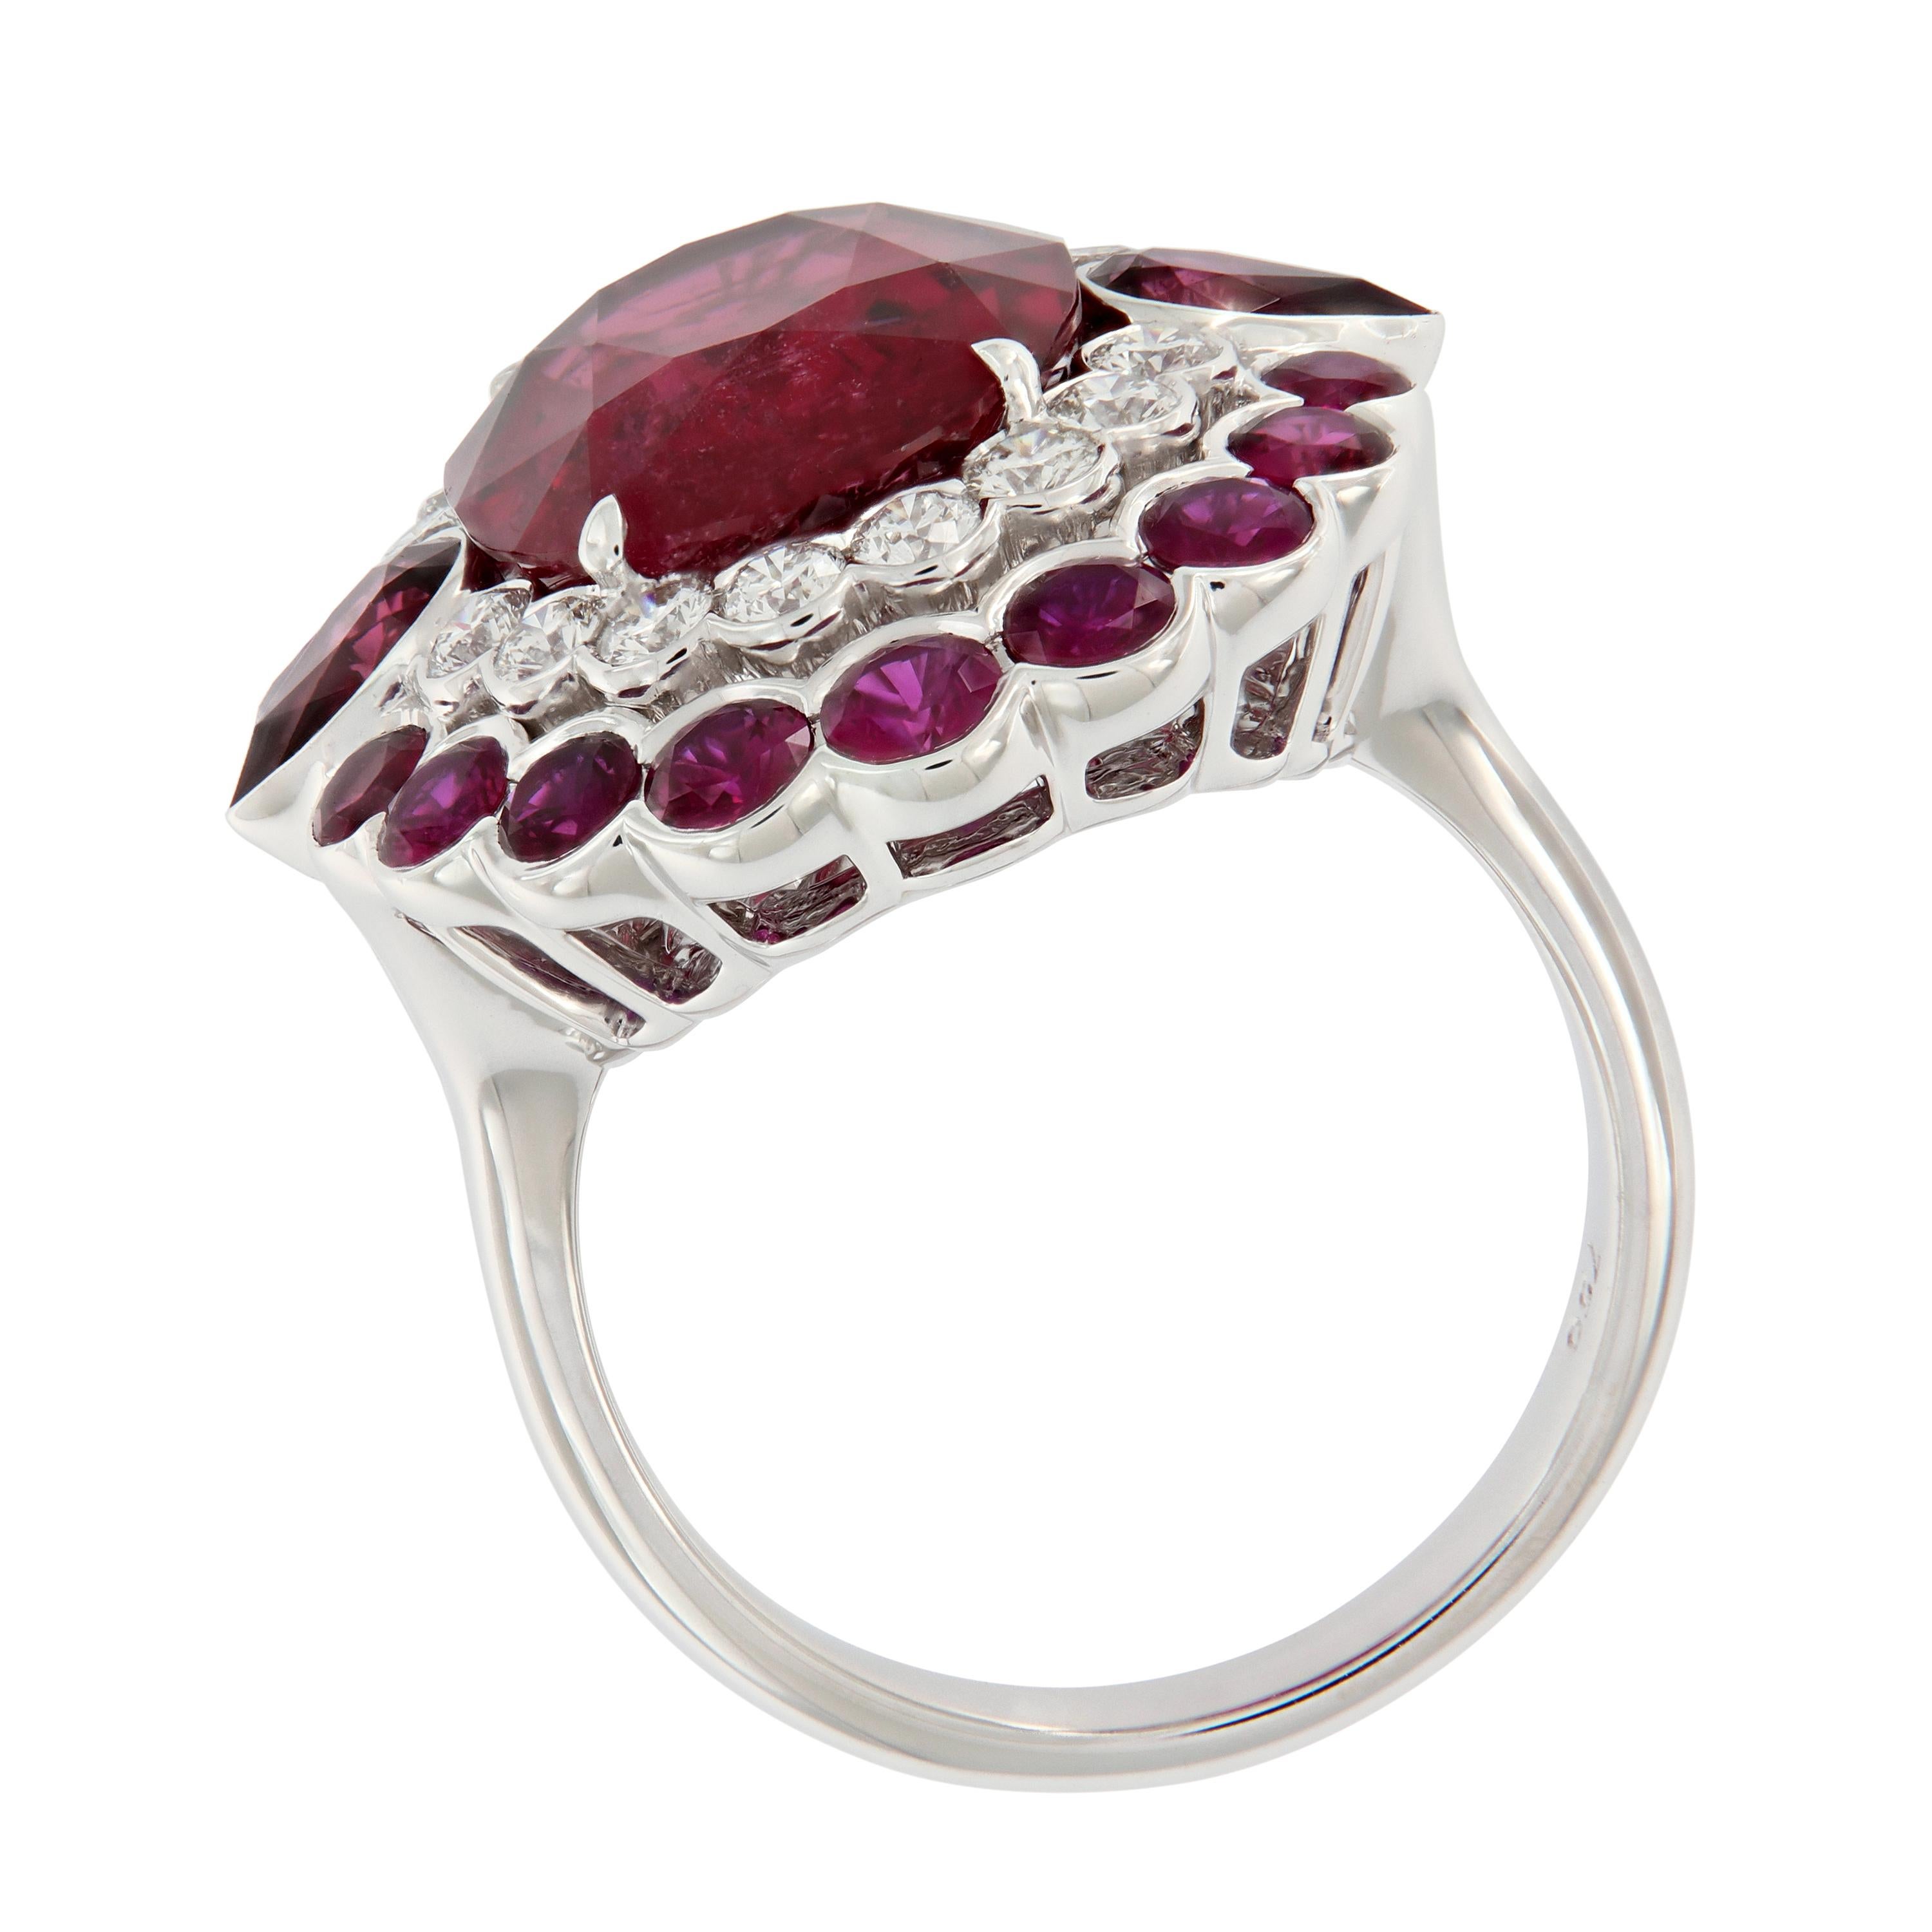 Glamorous 18k white gold cocktail ring showcases a large oval rubelite center accented with two pear shaped rubelites and  a halo of round diamonds and rubelites . surrounded by diamonds . Weigh 5.4 grams.

Rubelite 6.73 cttw
Diamonds 0.65 cttw